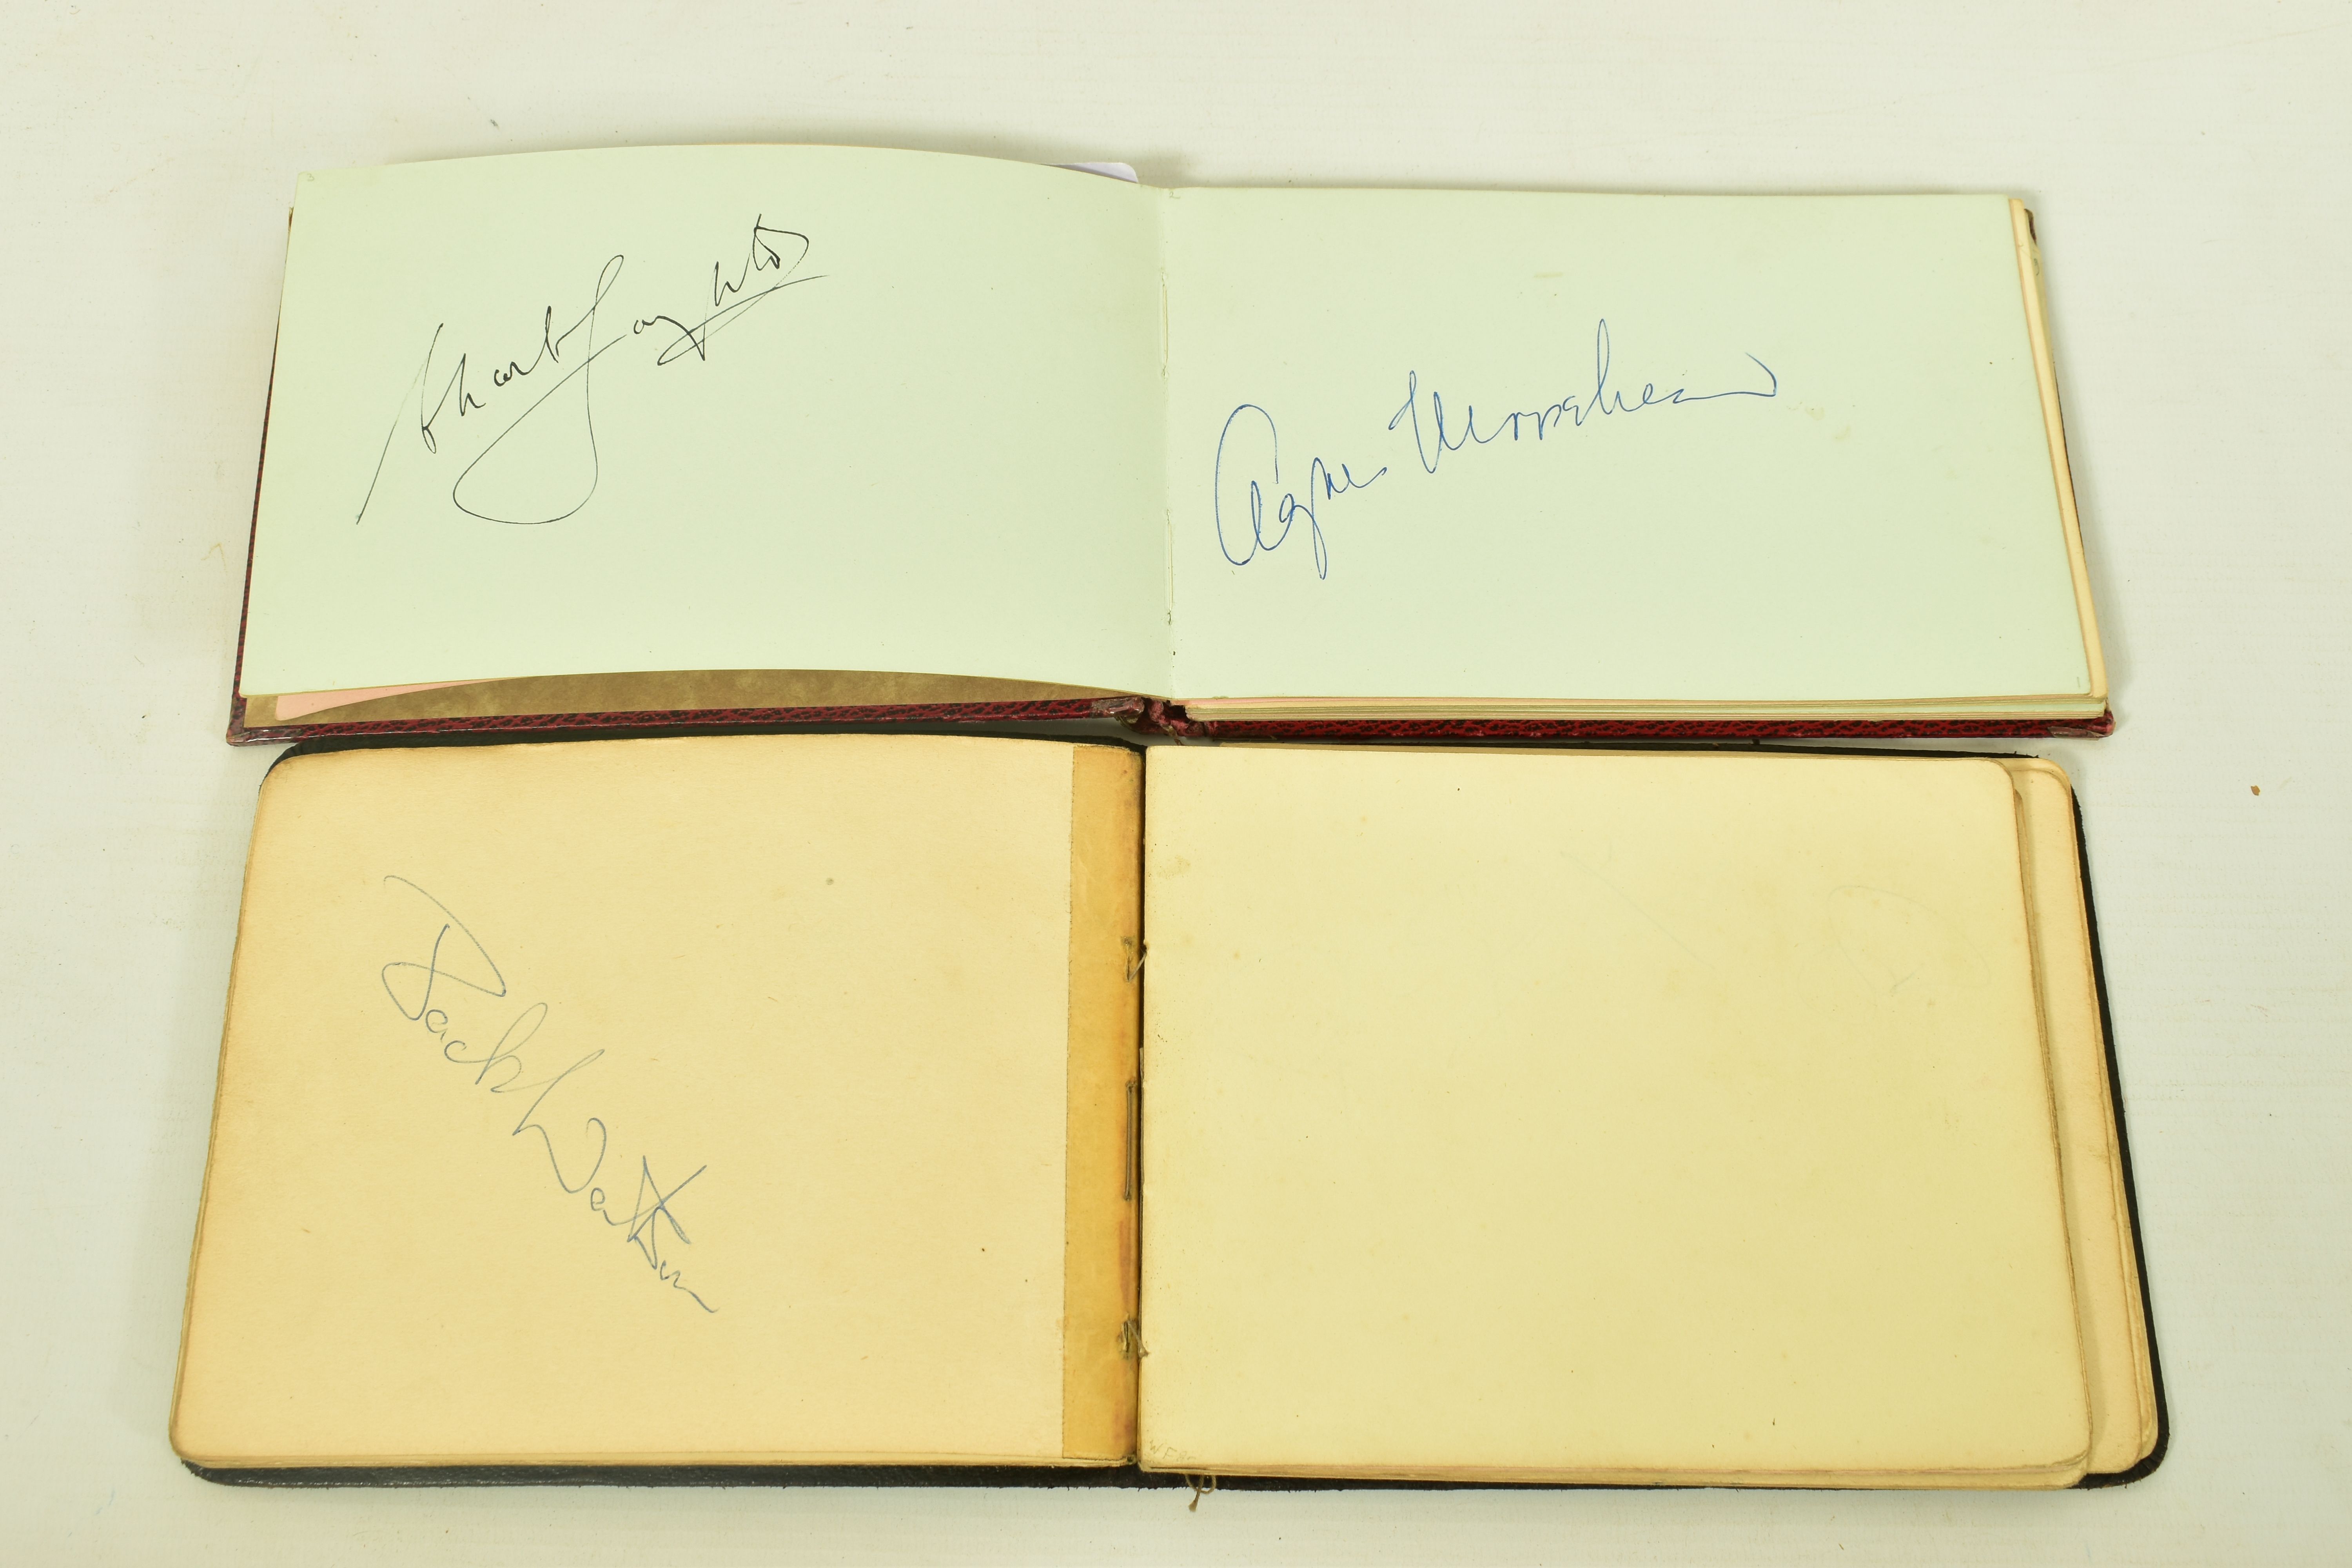 FILM & STAGE AUTOGRAPH ALBUM, a collection of signatures in two autograph albums featuring some of - Image 4 of 11